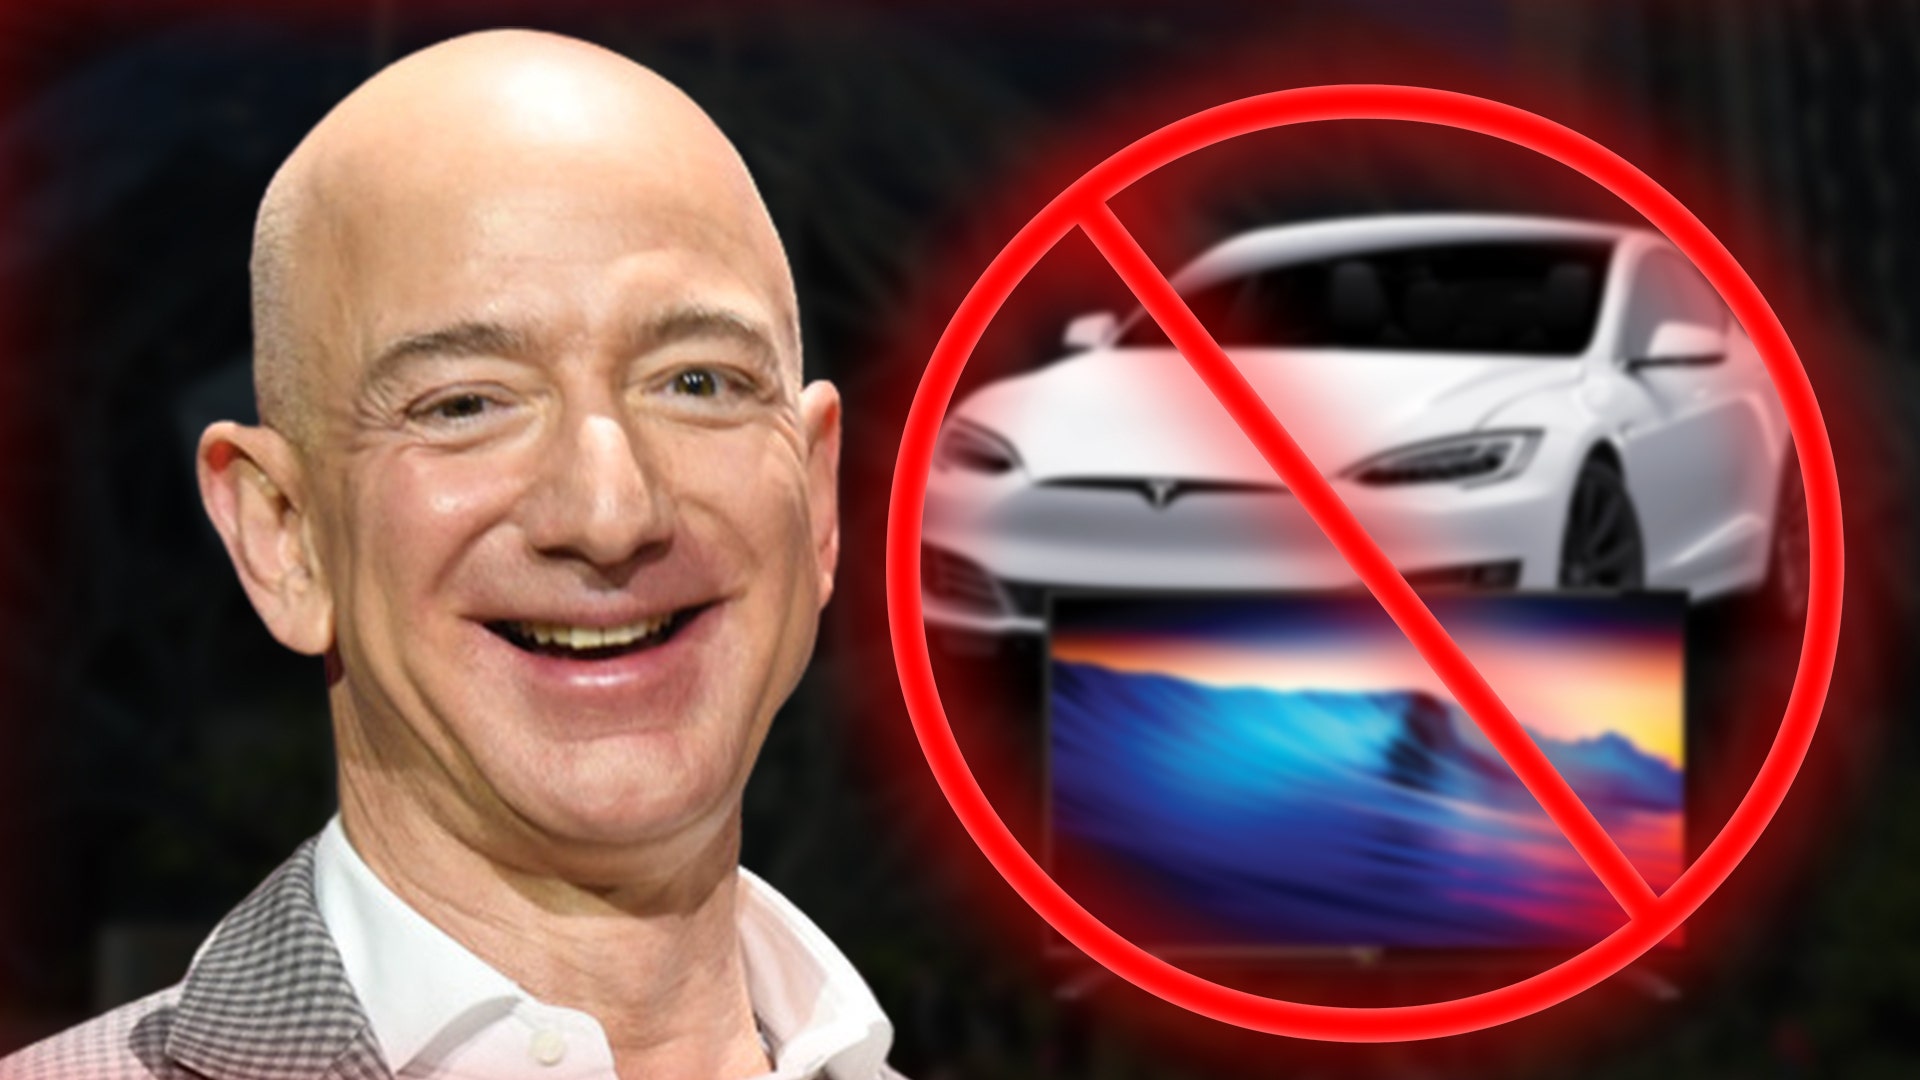 Jeff Bezos Says Don't Buy That New TV, Save Your Money Instead: Here's Why